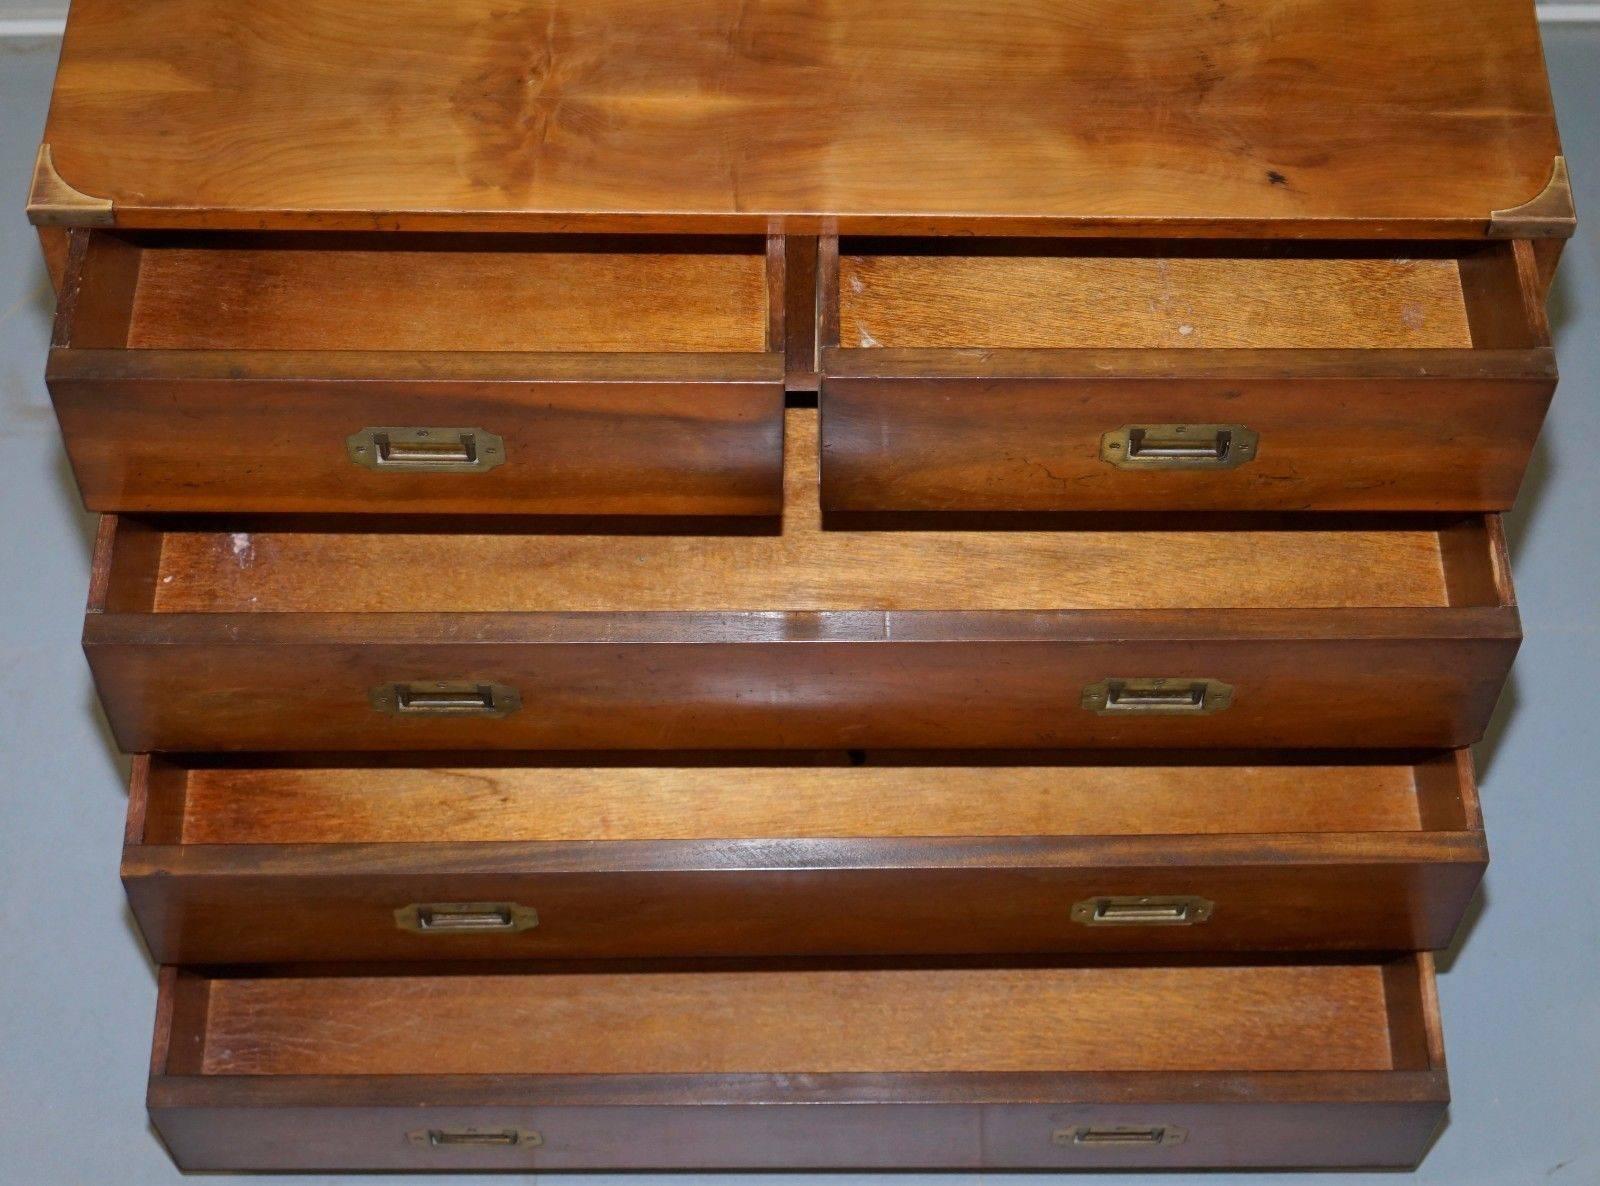 Hand-Crafted Yew Wood Veneer Military Campaign Chest of Drawers with Brass Fittings & Handles